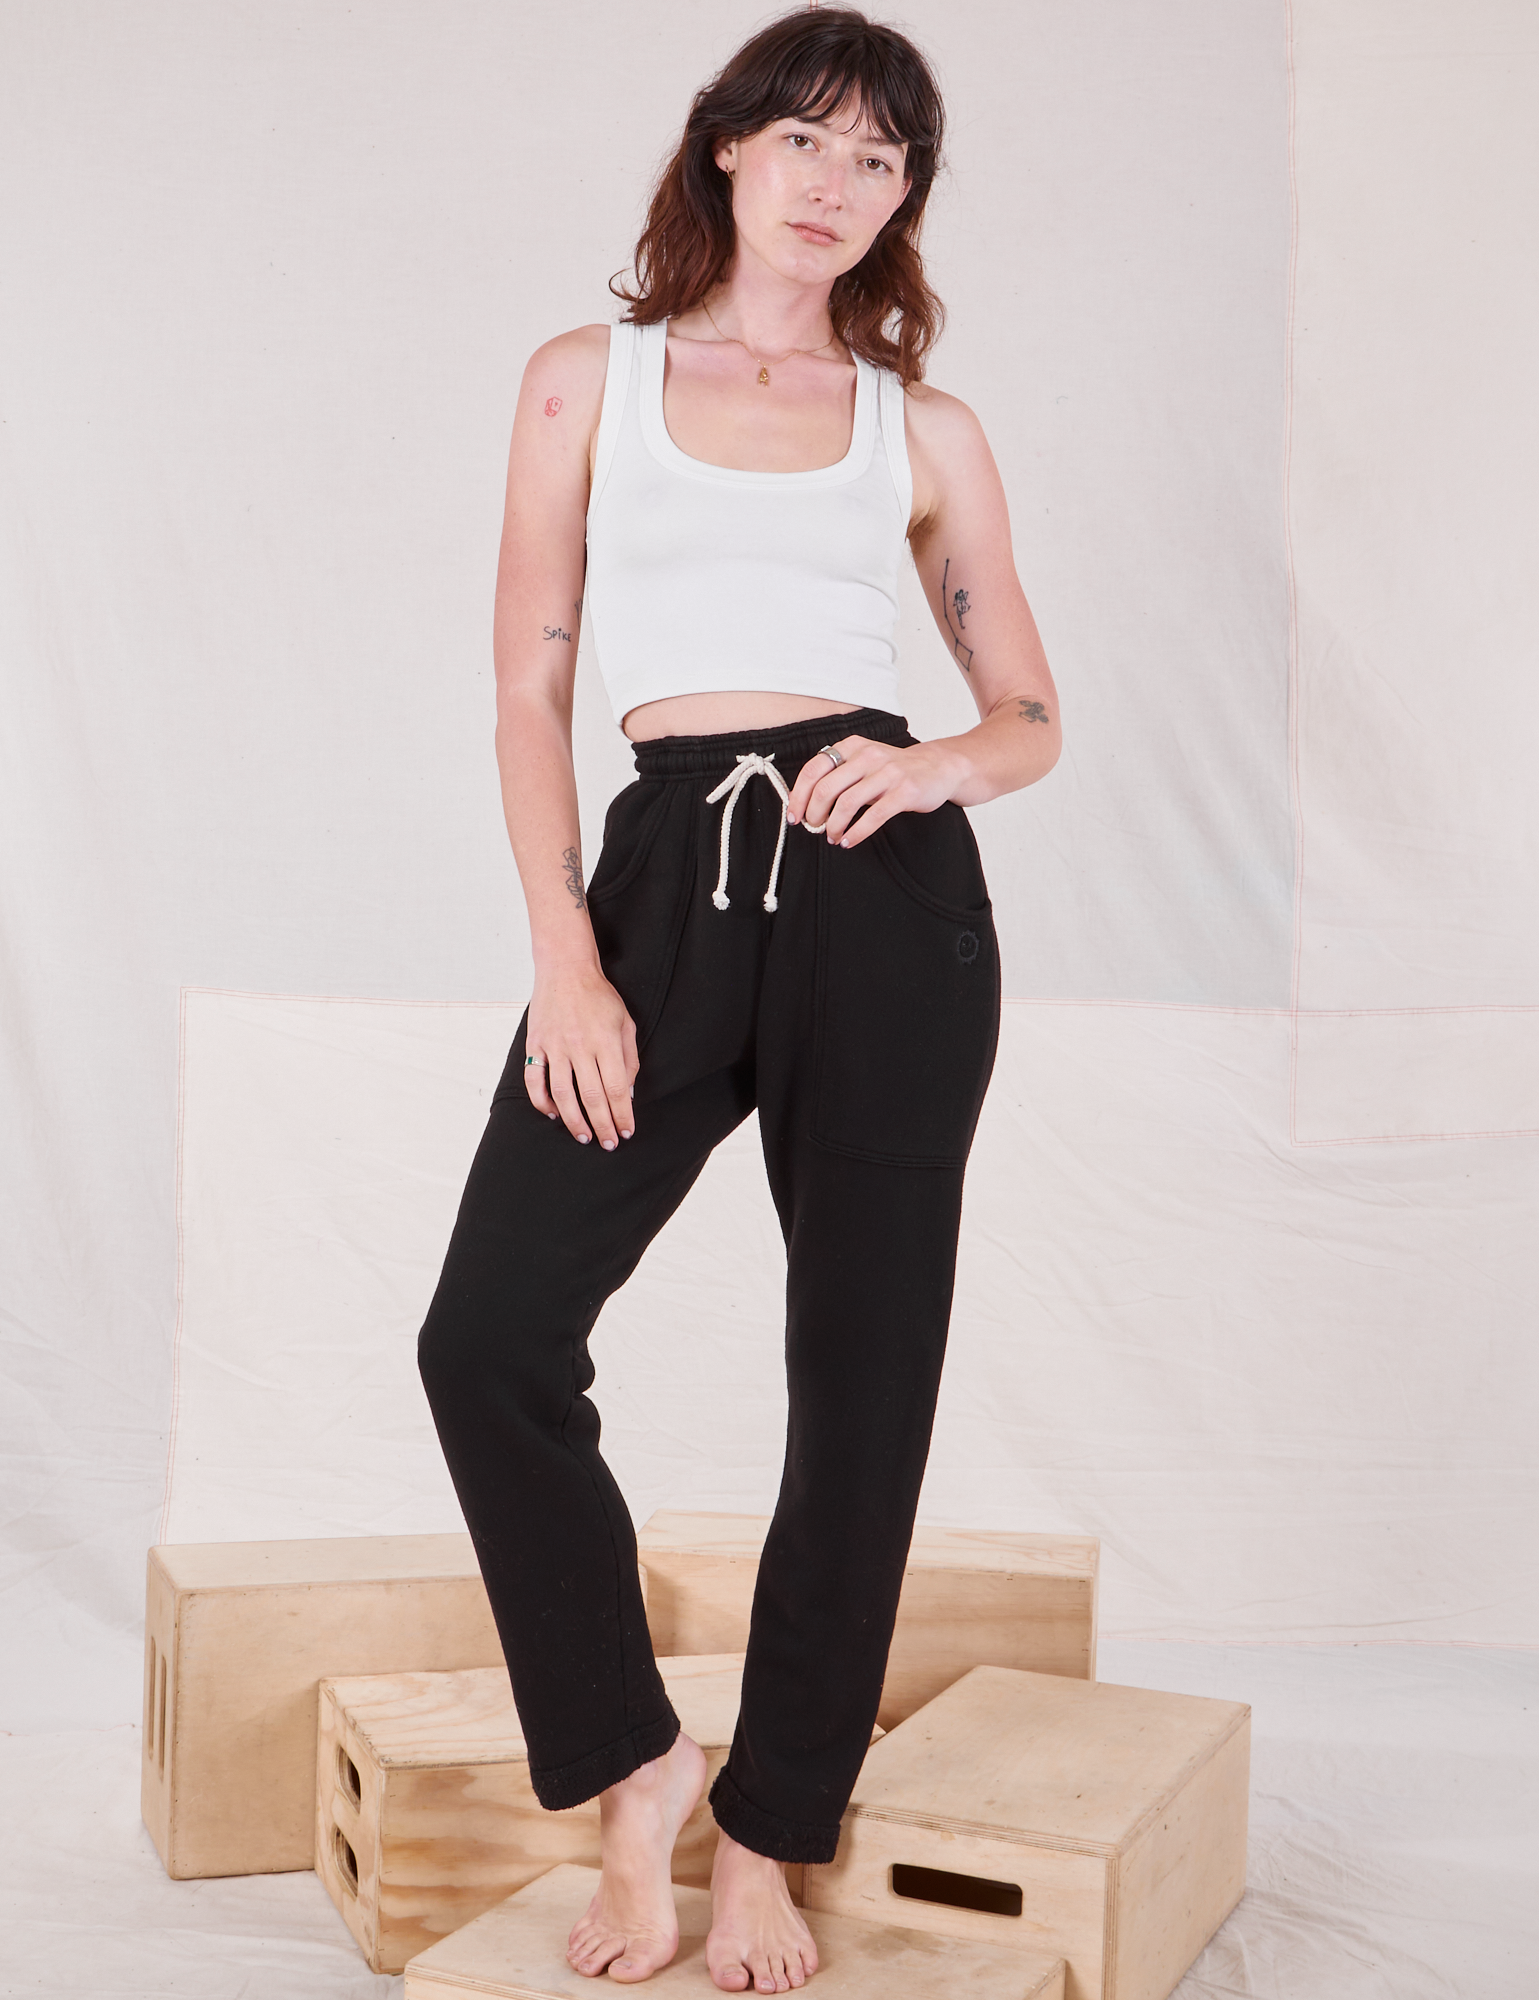 Alex is wearing Rolled Cuff Sweat Pants in Basic Black and Cropped Tank in vintage tee off-white